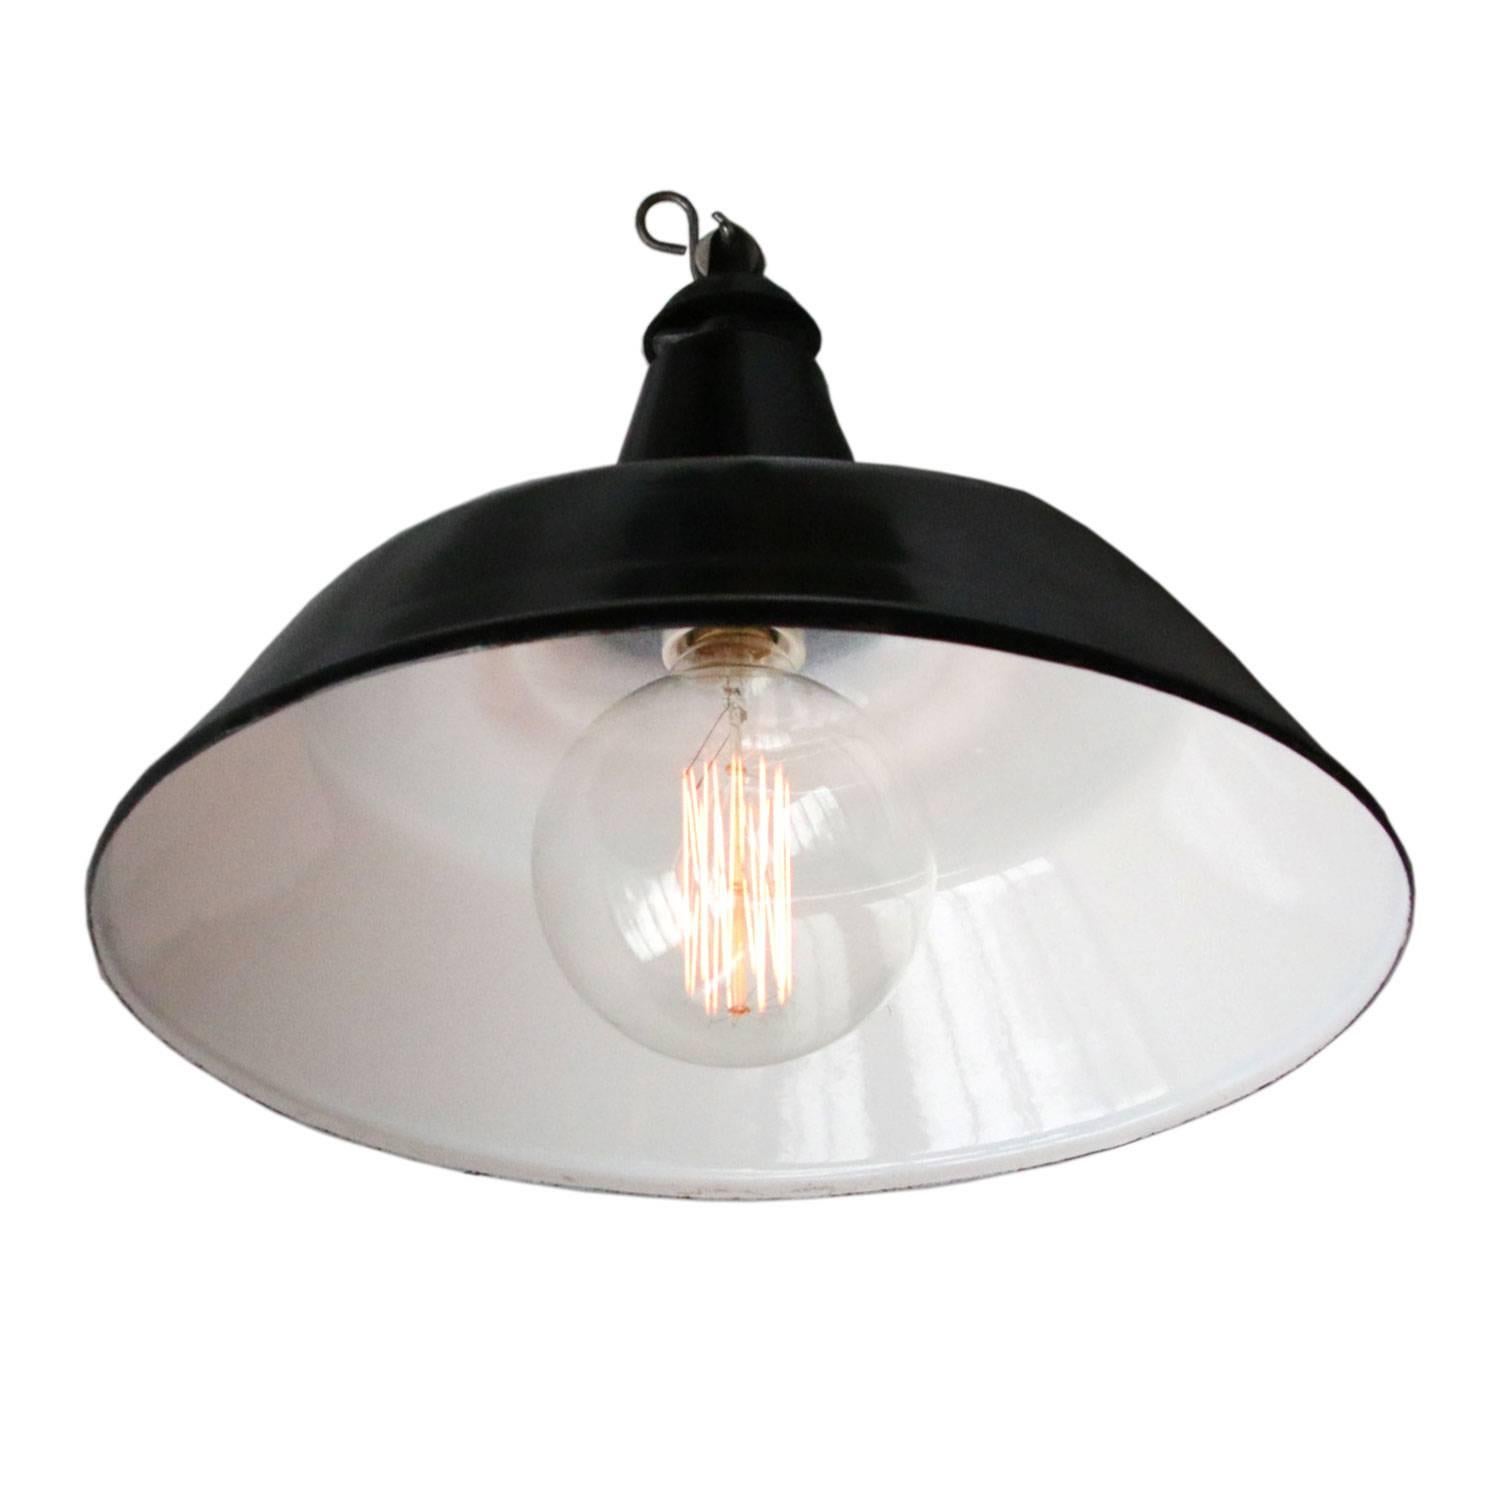 Belgian industrial hanging lamp. Black enamel white interior.

Weight: 1.5 kg / 3.3 lb

Priced per individual item. All lamps have been made suitable by international standards for incandescent light bulbs, energy-efficient and LED bulbs.